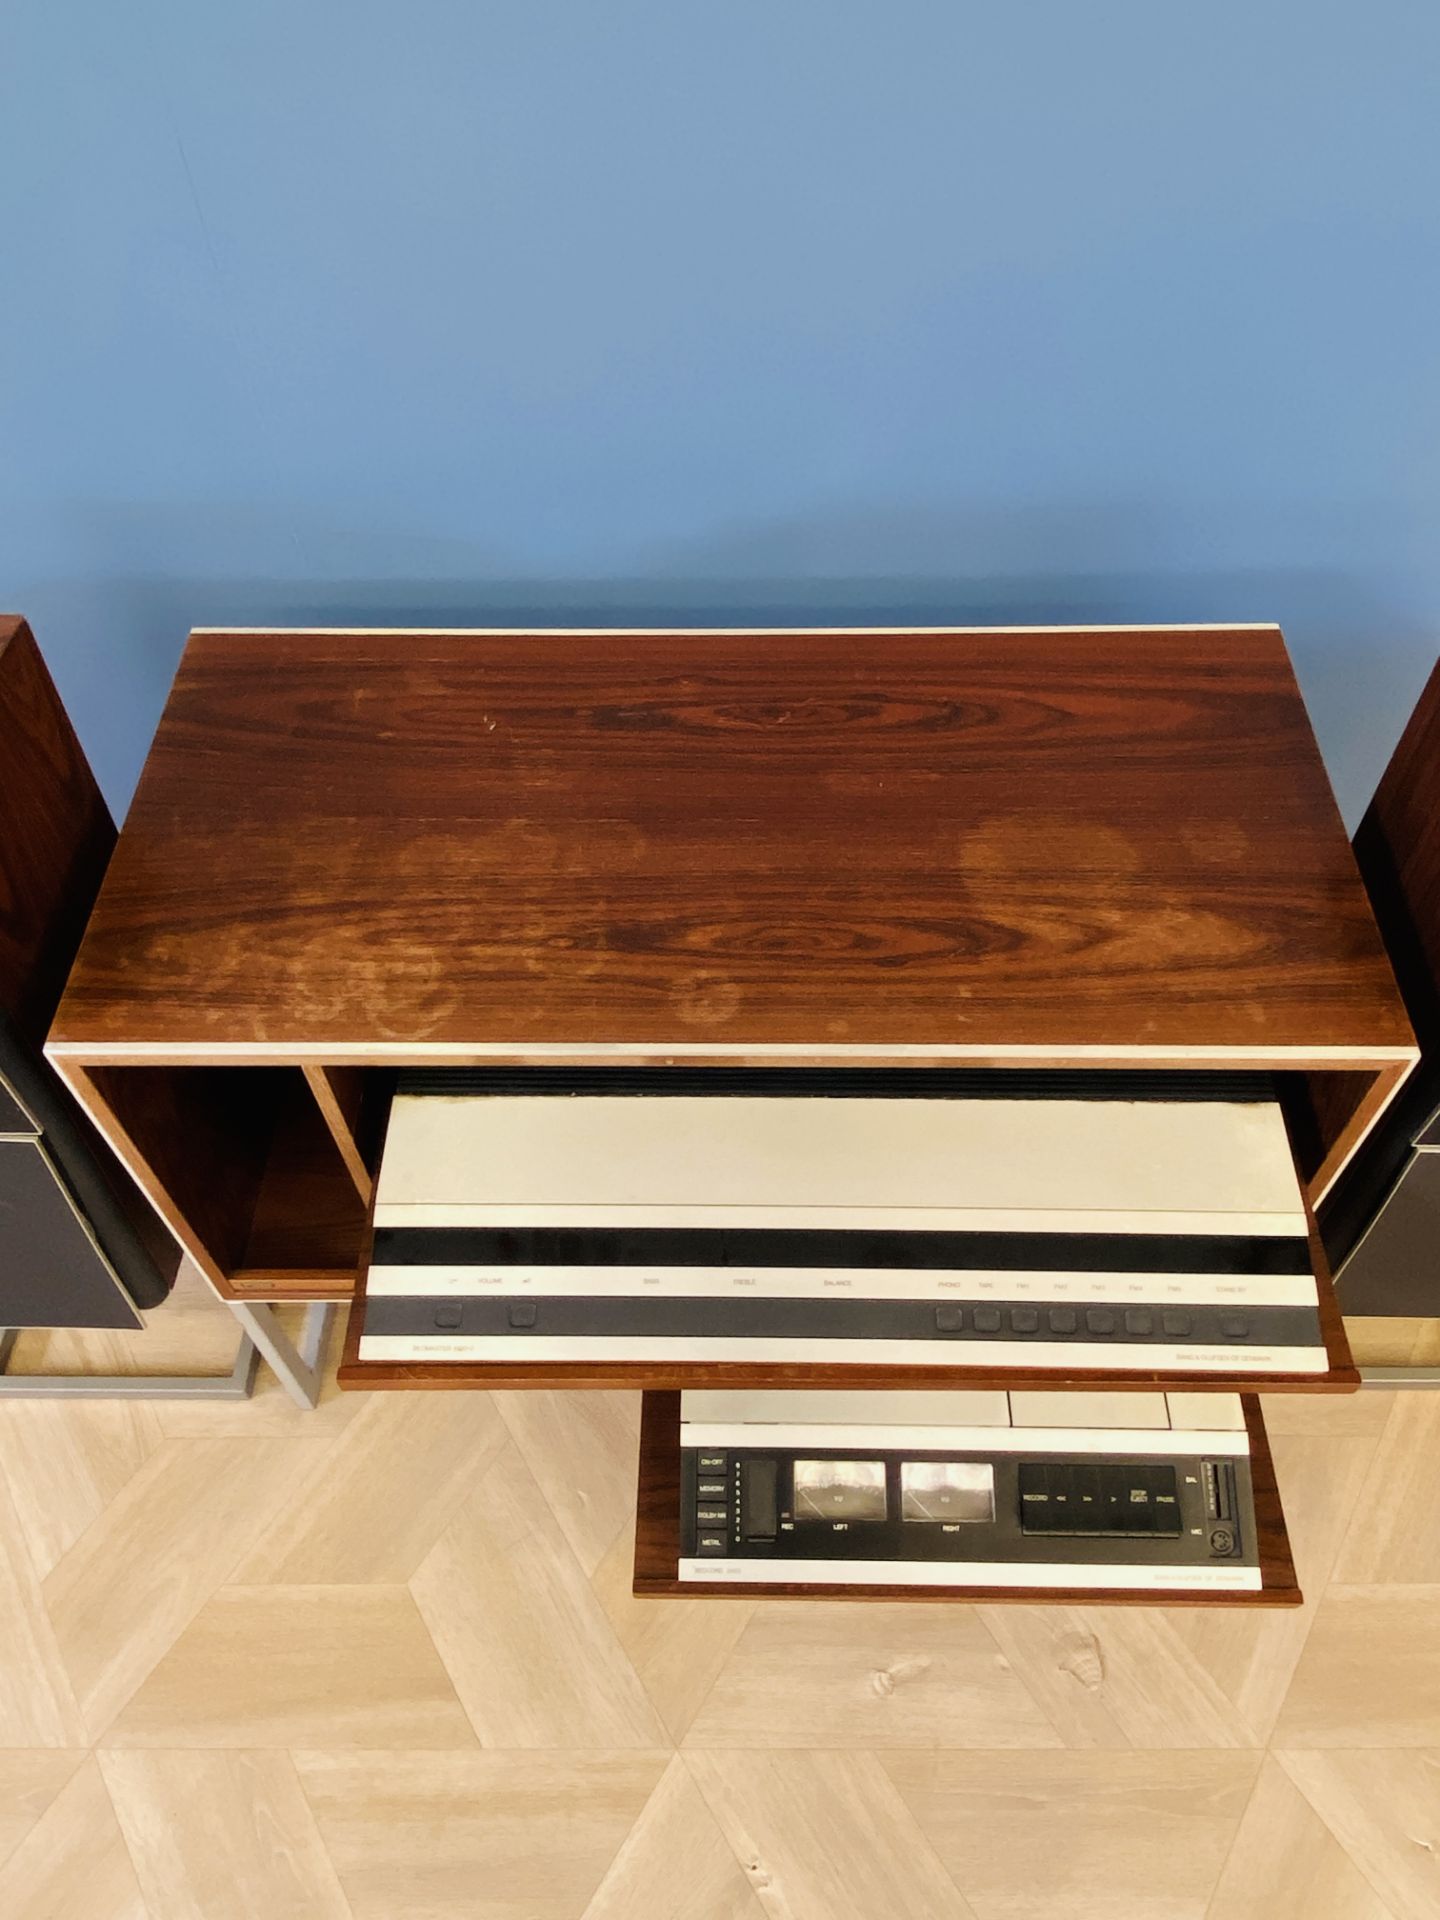 Bang & Olufsen Beomaster 1900-2; Beocord 2400, Beogram 2200 on stand; & Beovox S50's - Image 7 of 9